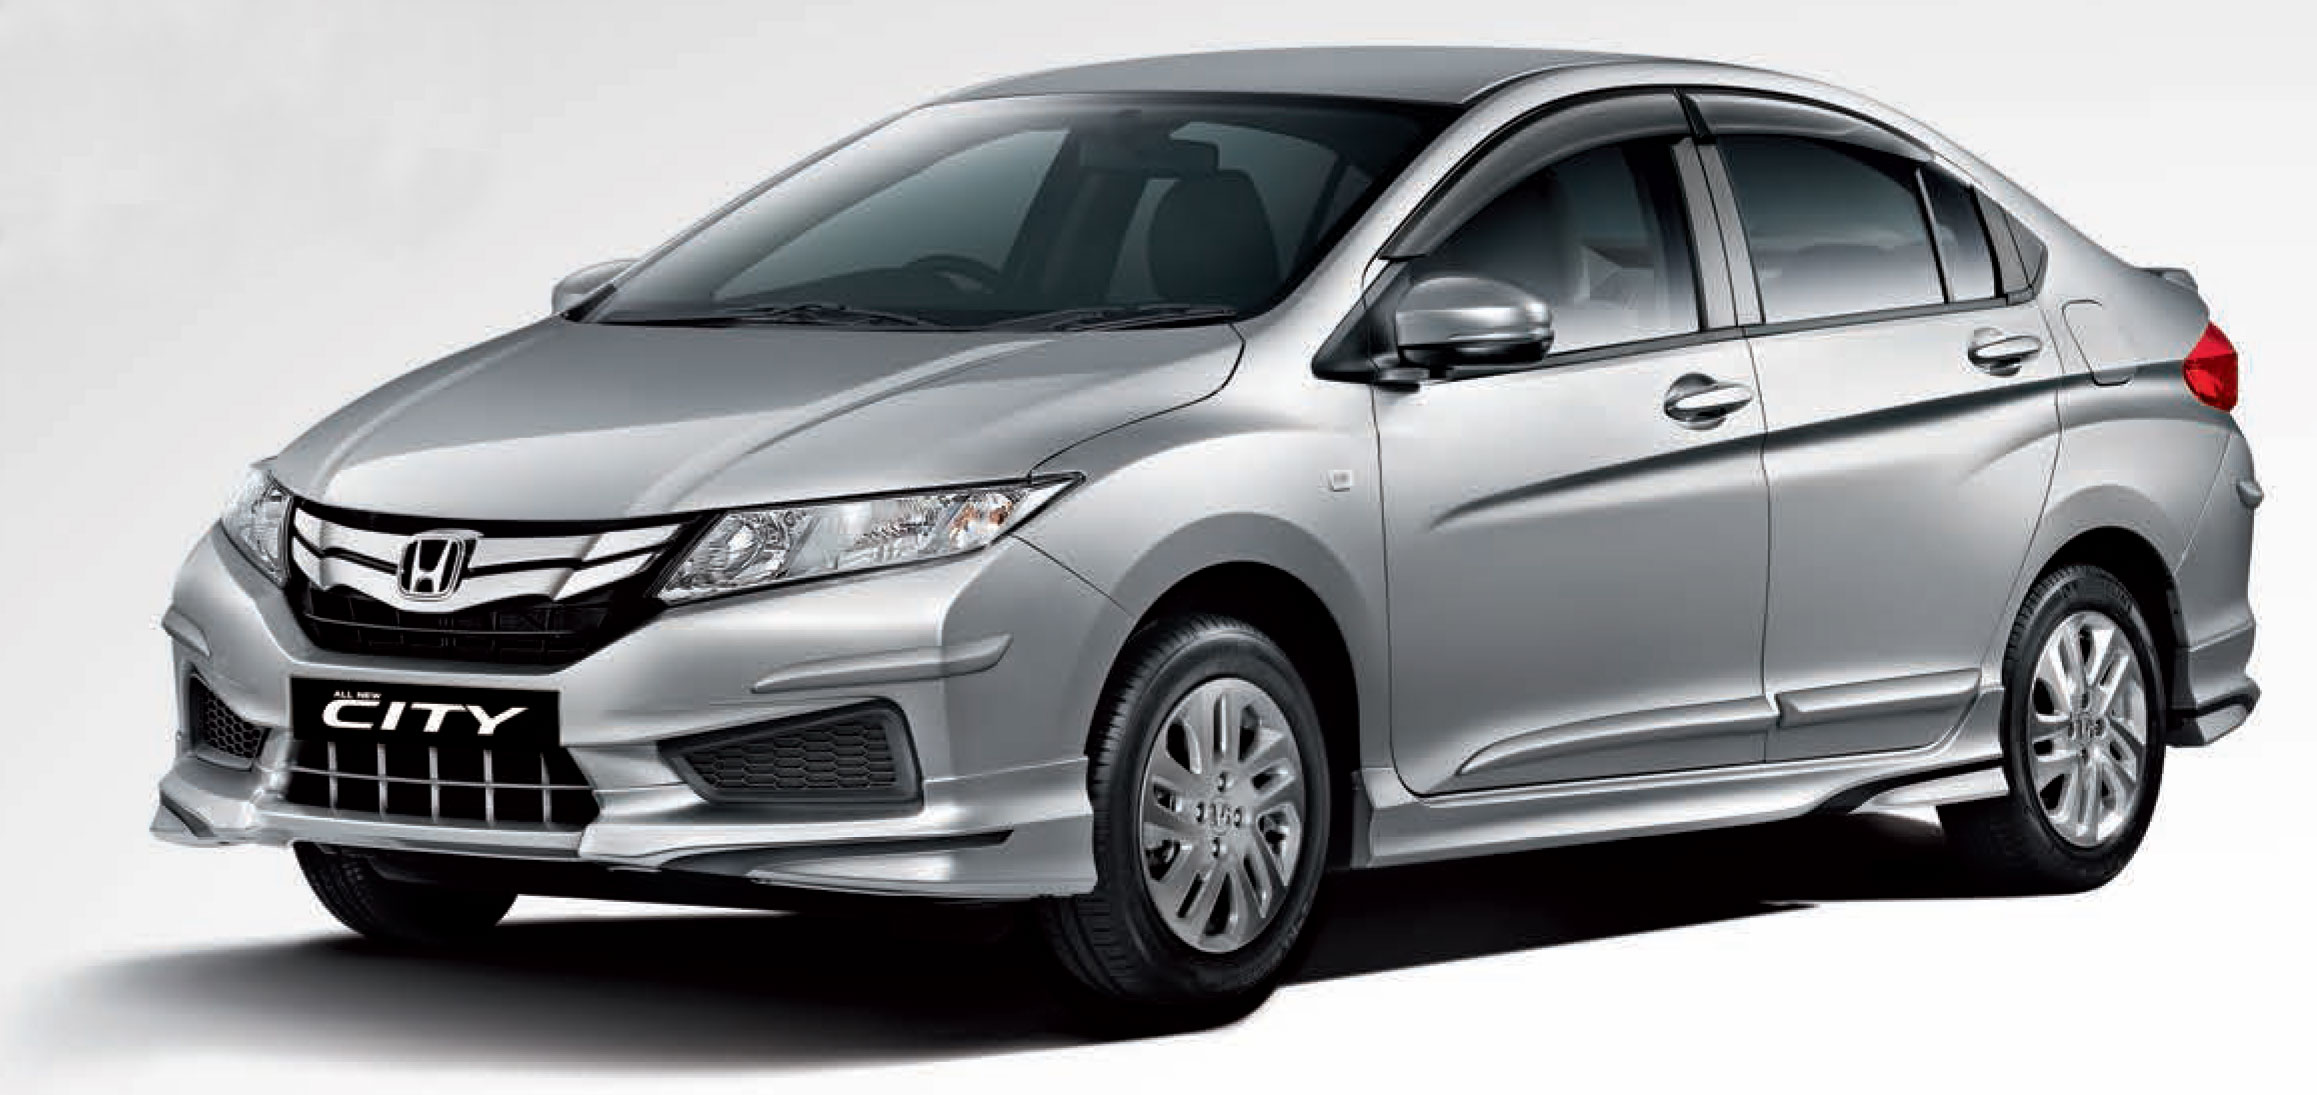 2014 Honda City launched in India - new details Image 220646